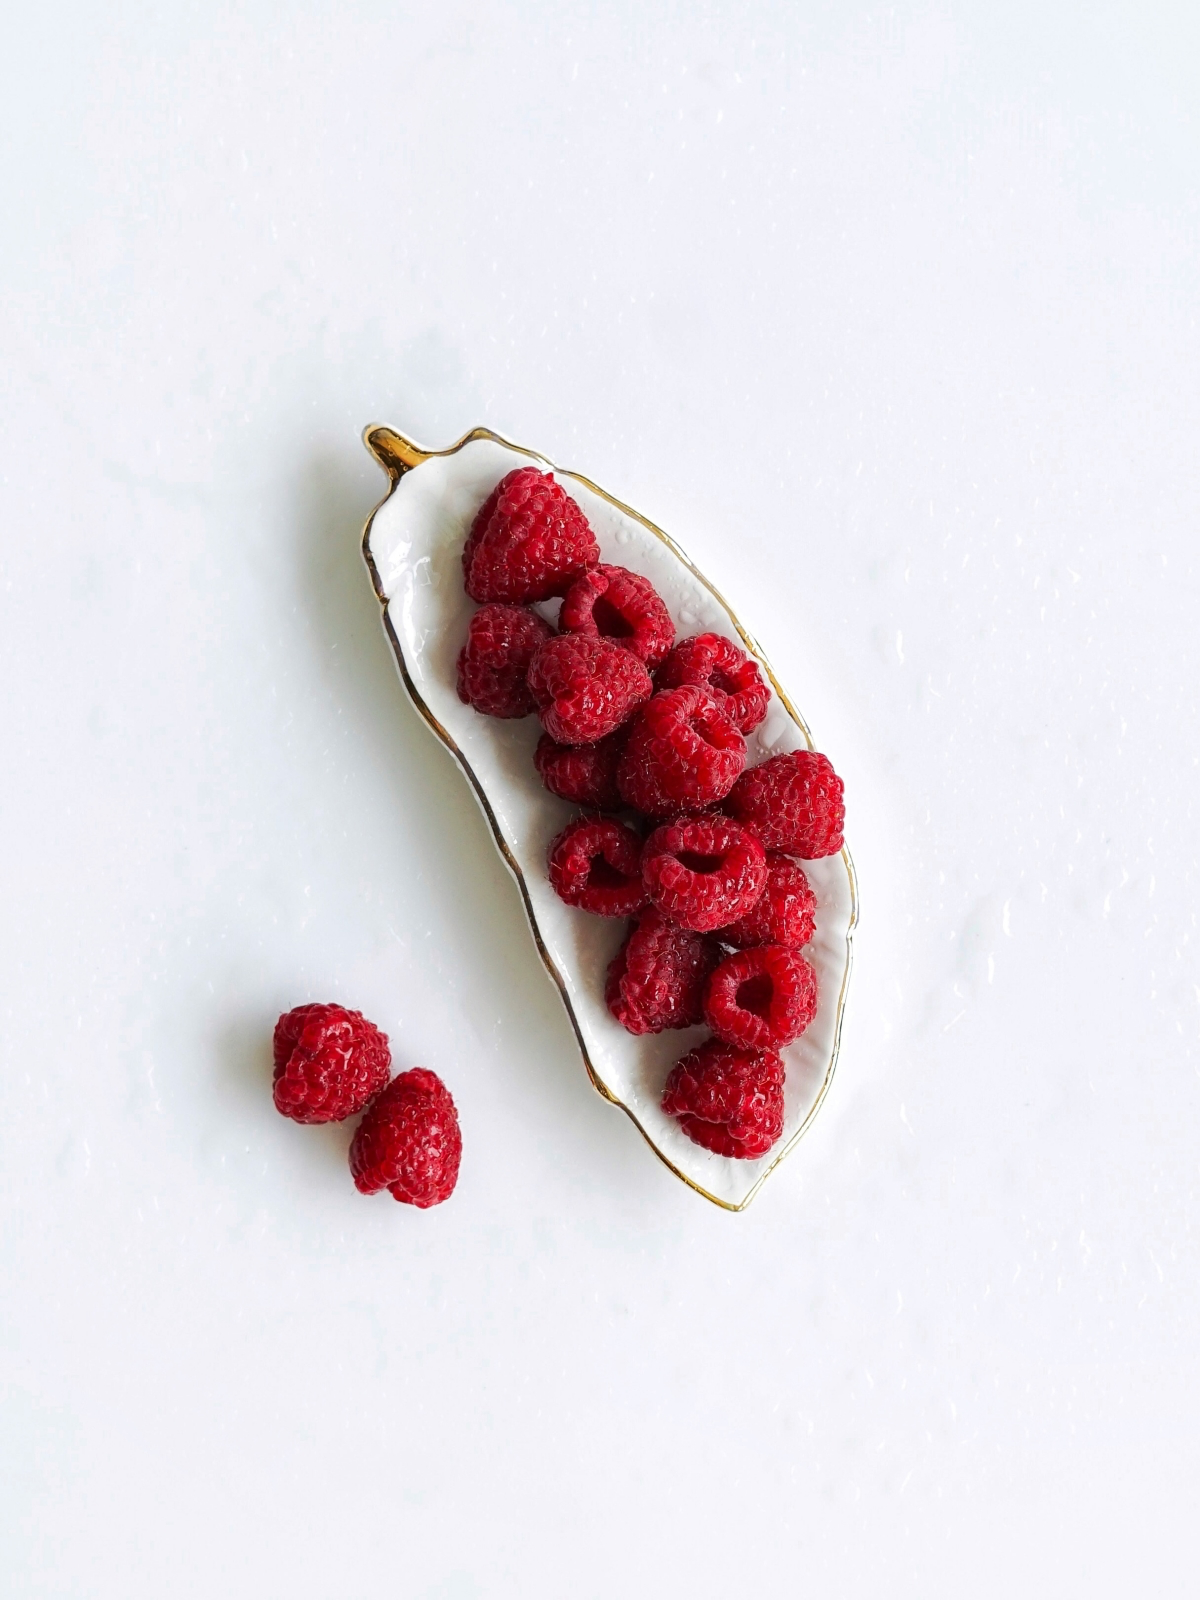 what are the benefits of eating fresh raspberries